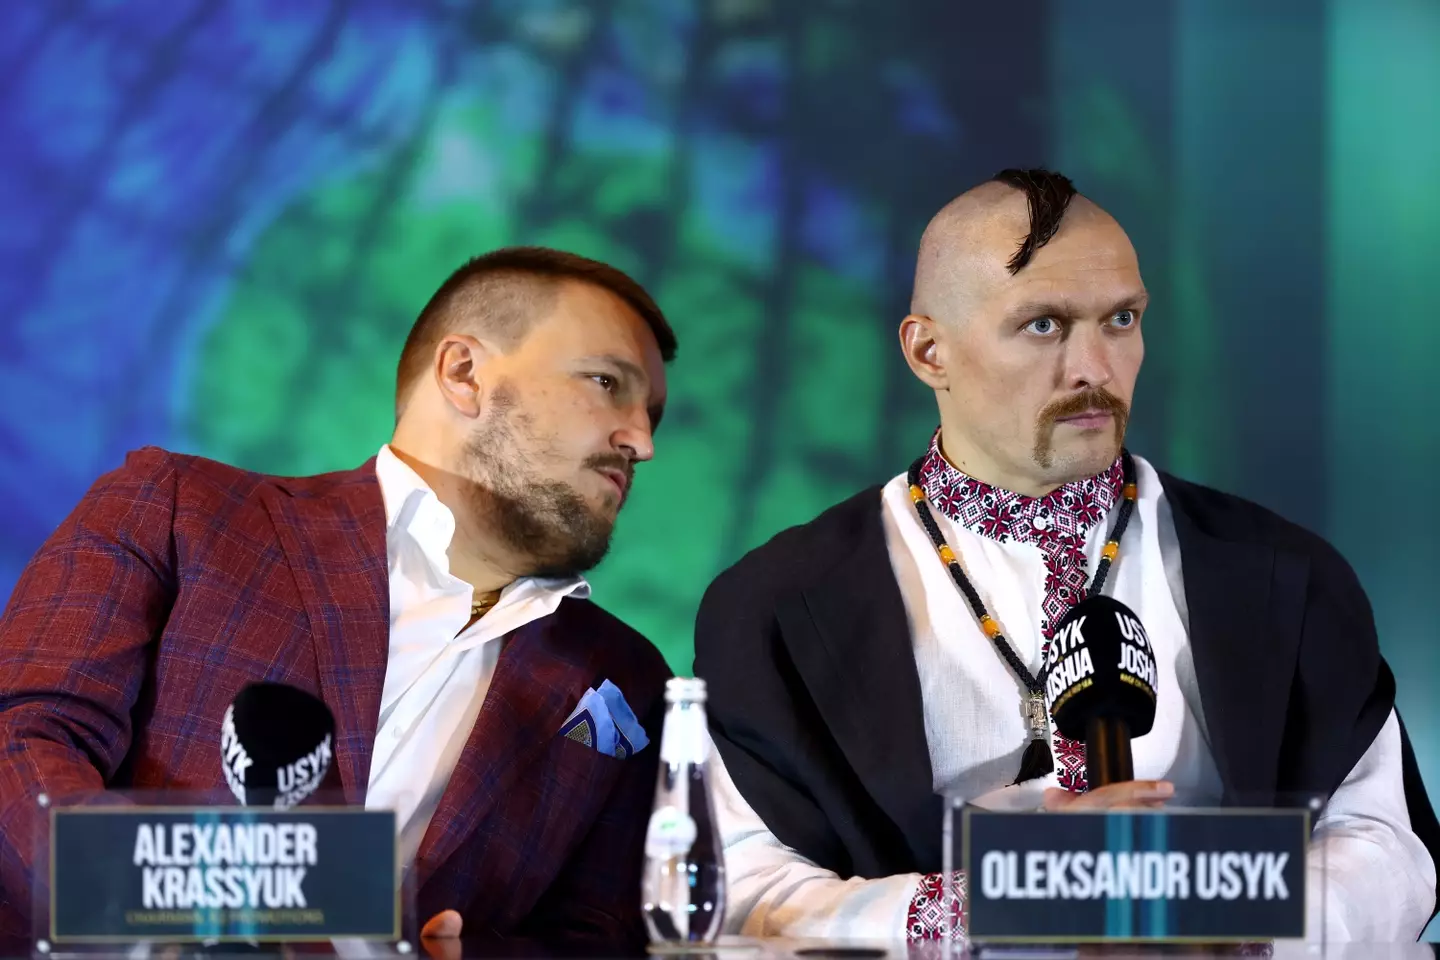 Oleksandr Usyk and Alexander Krassyuk during a press conference. Image: Getty